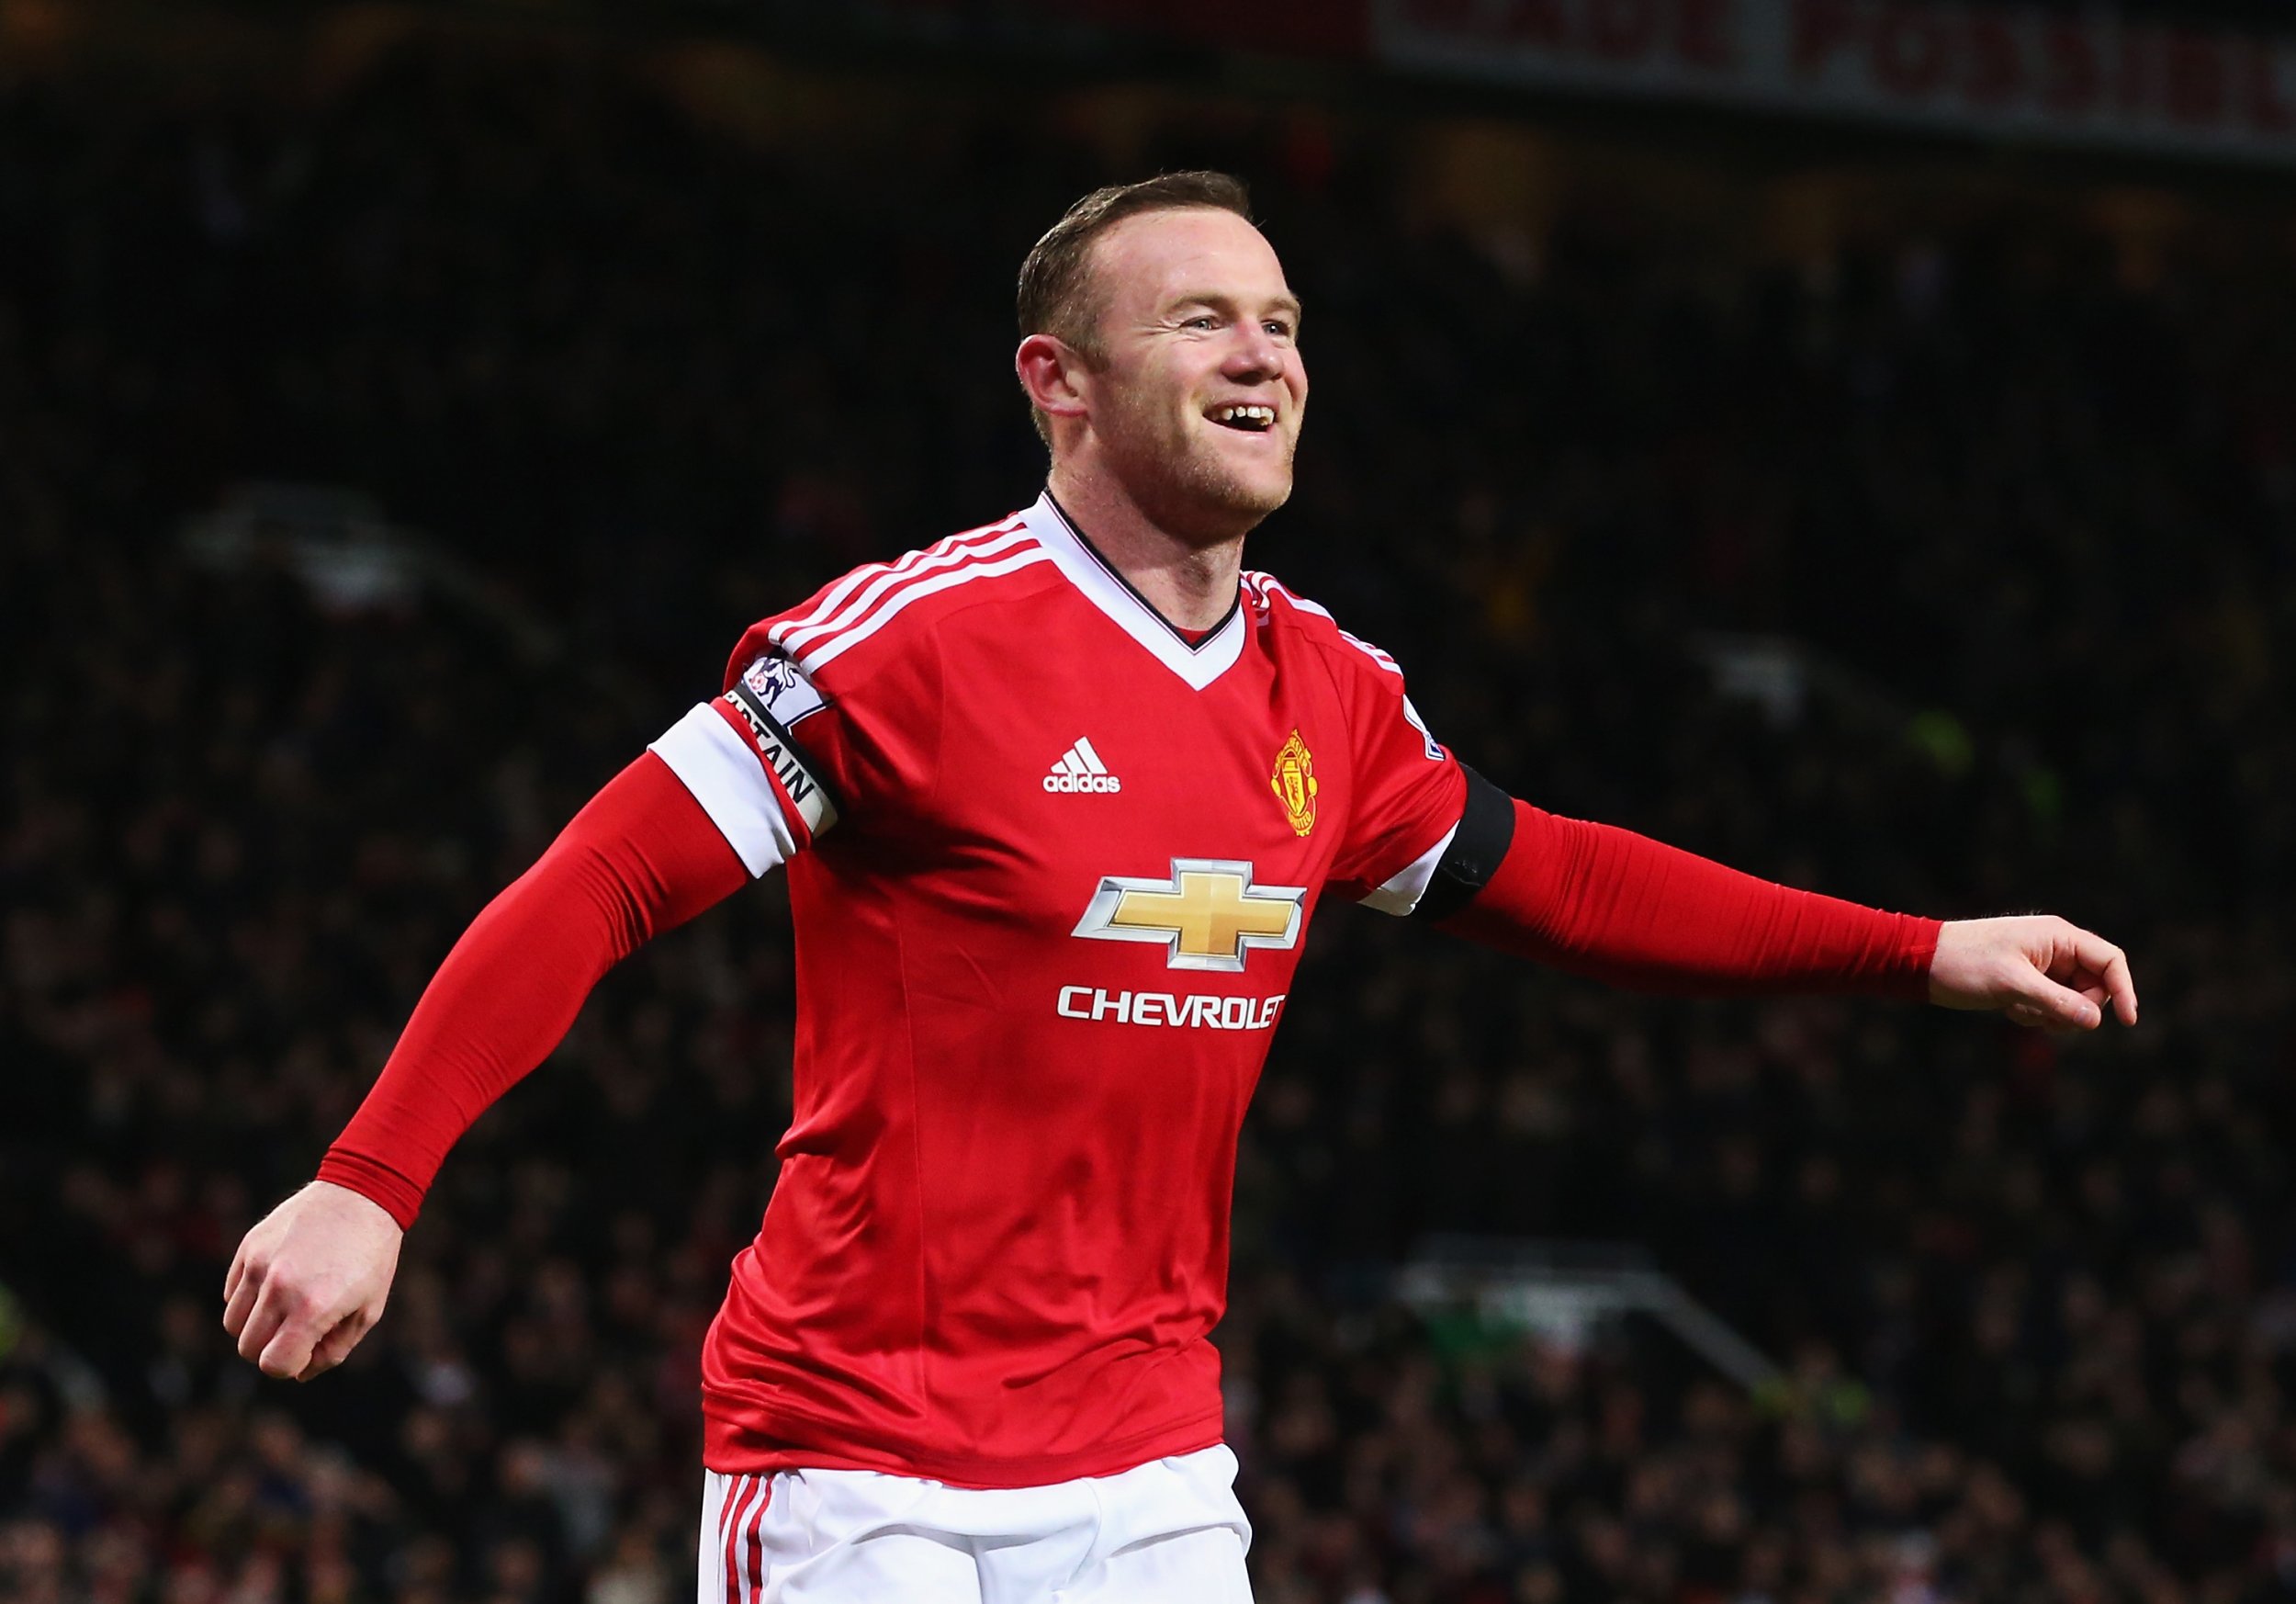 Manchester United captain Wayne Rooney says he should be fit for the end of the season.